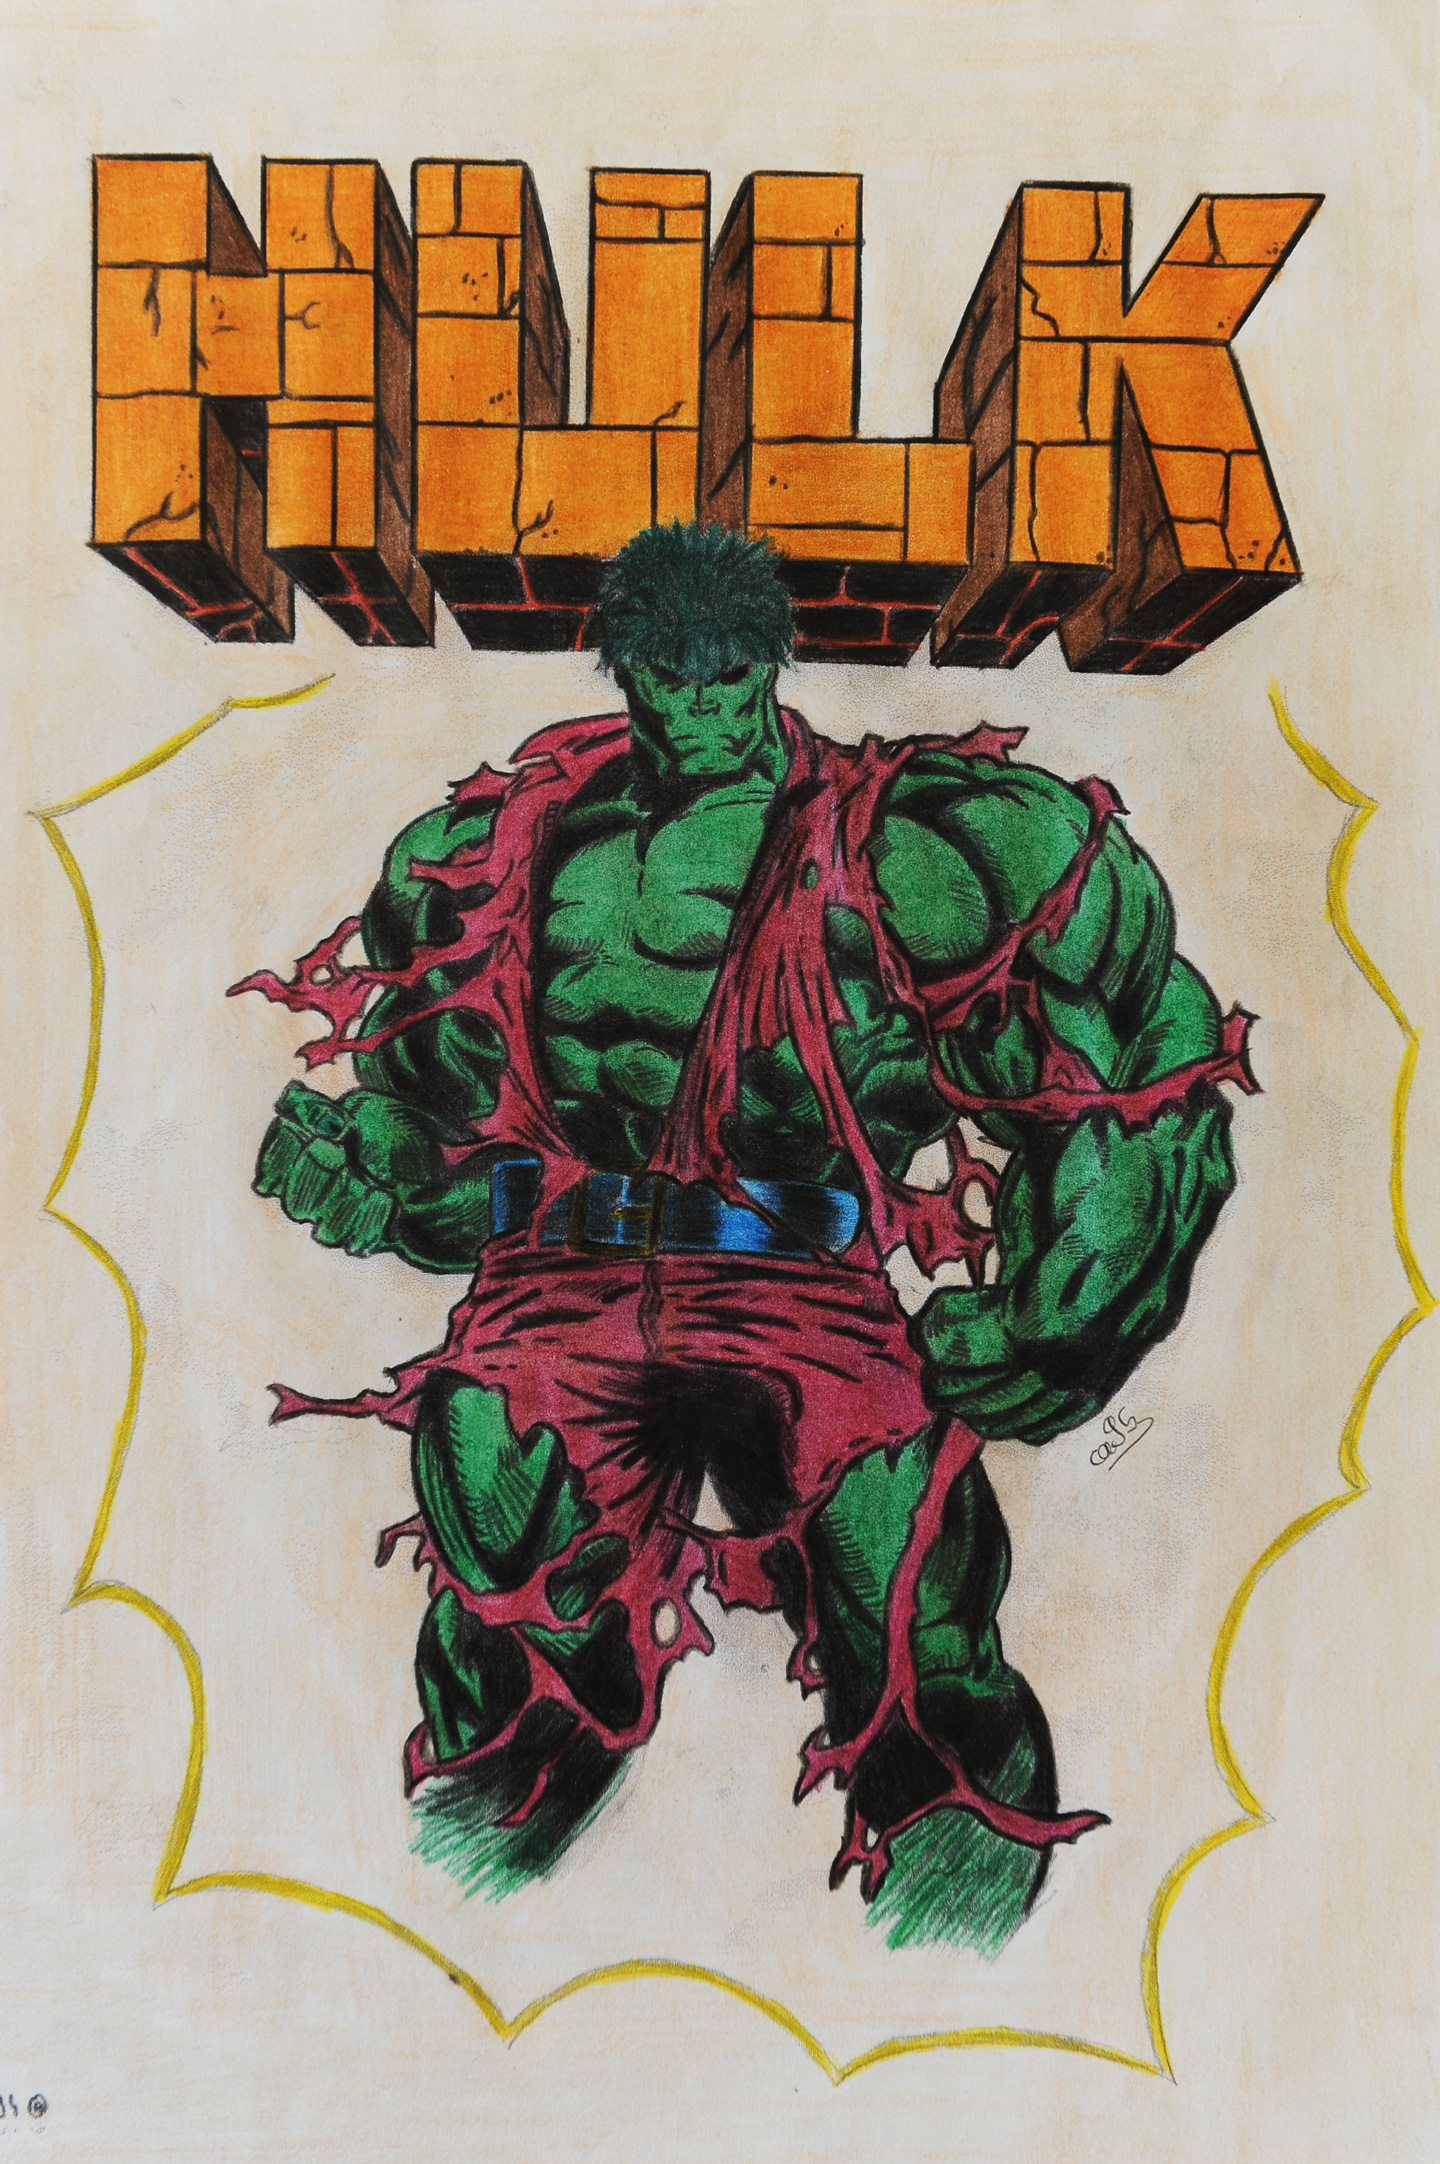 A colored drawing of The Hulk from Marvel Comics